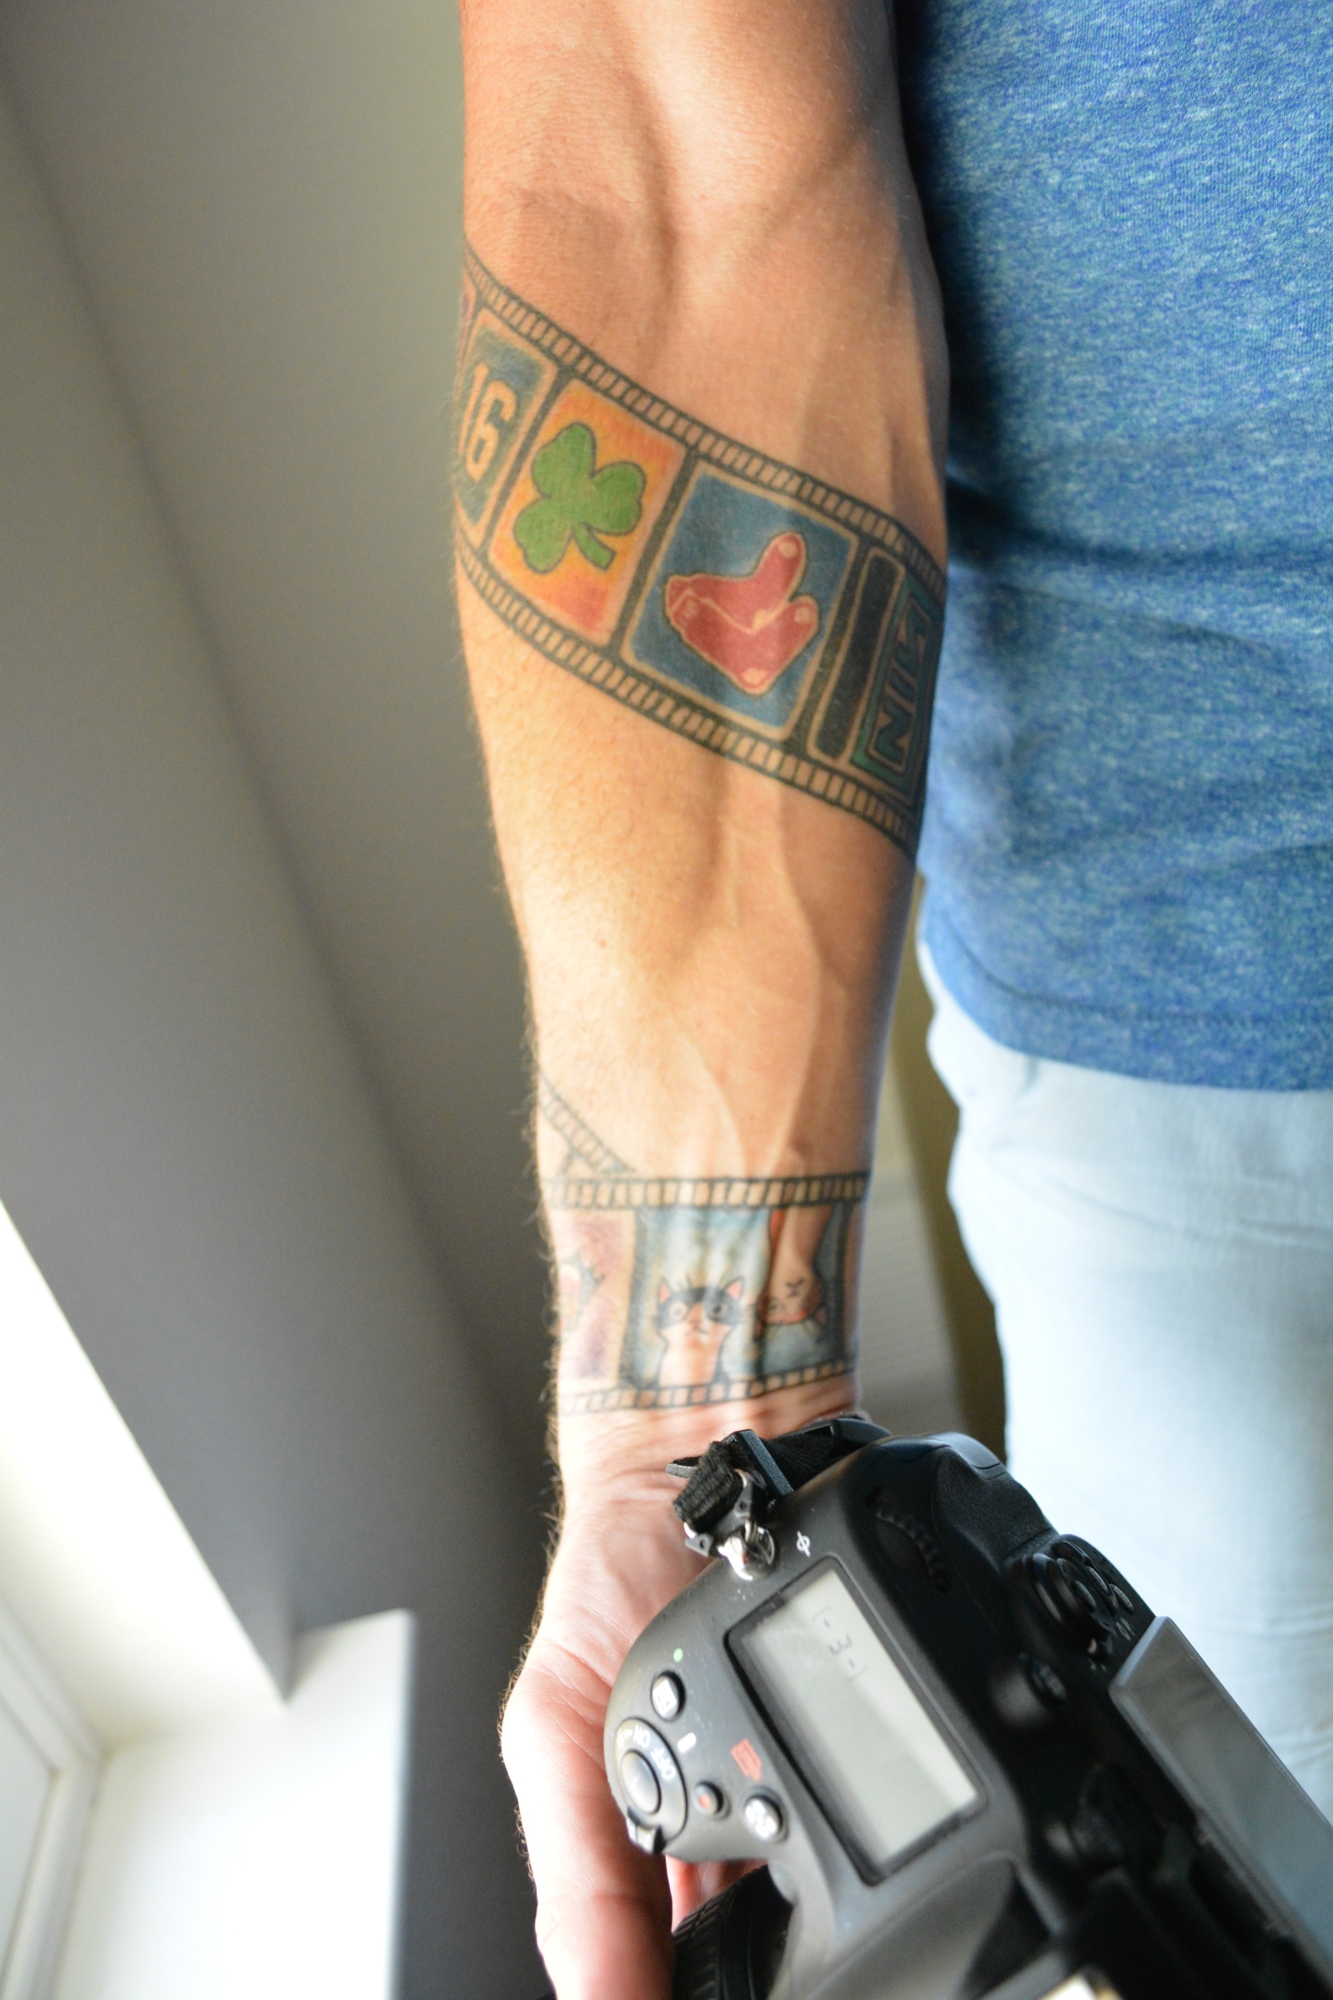 Thomas Cronshaw's film tattoo features things important to him, such as his U.S. Marine badge, images of his cats, lucky numbers and more.